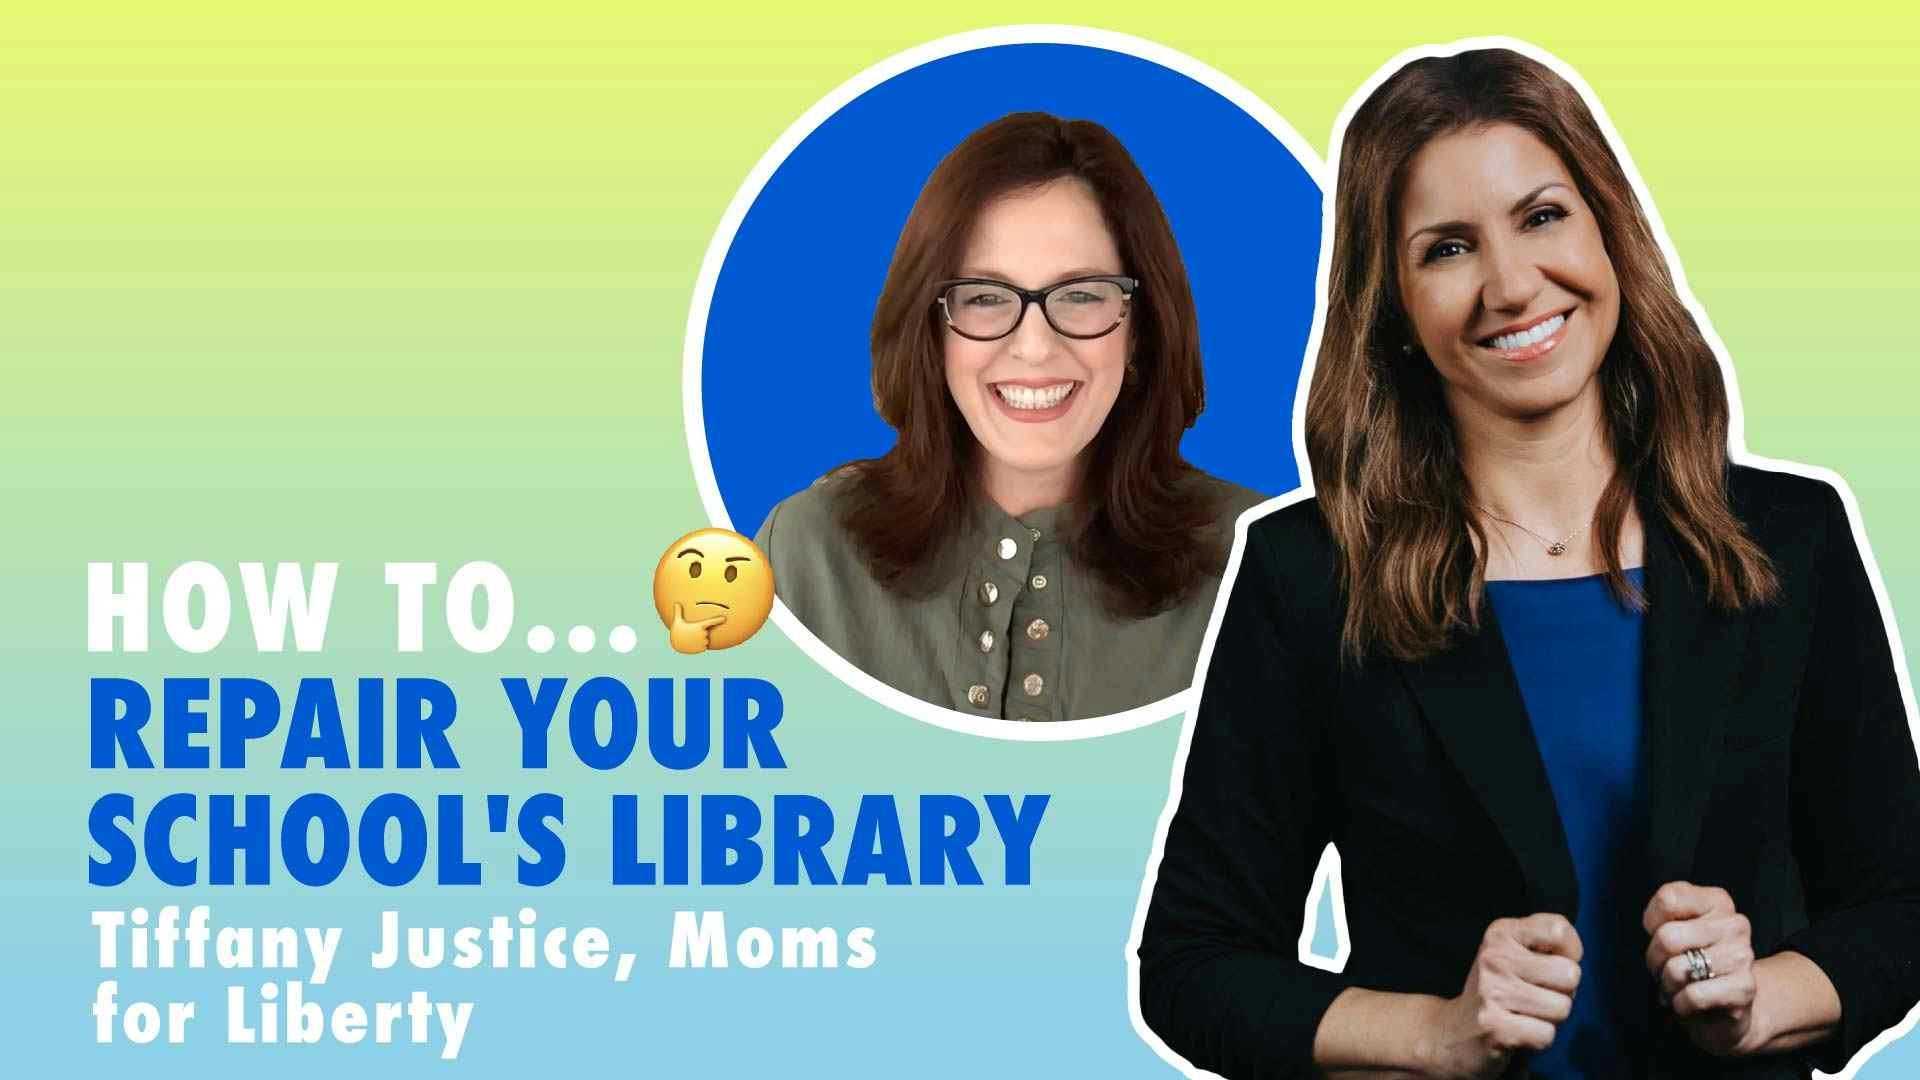 How To Repair Your School's Library with Tiffany Justice